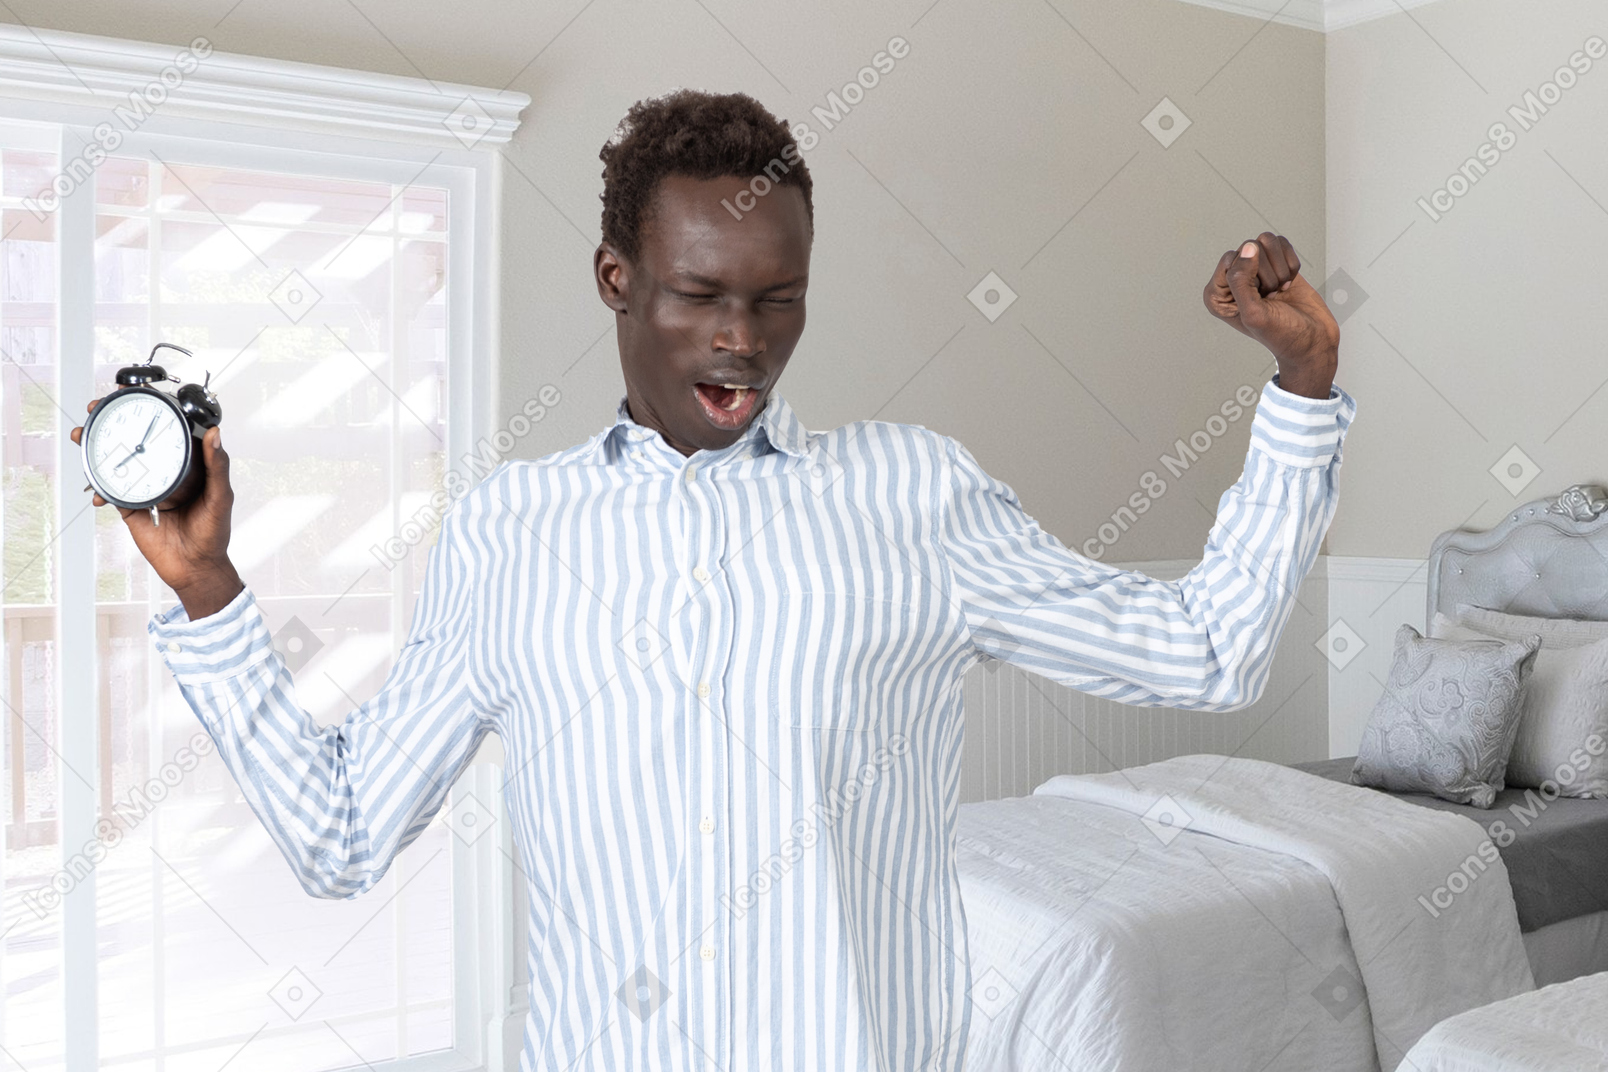 A man holding an alarm clock in his hand